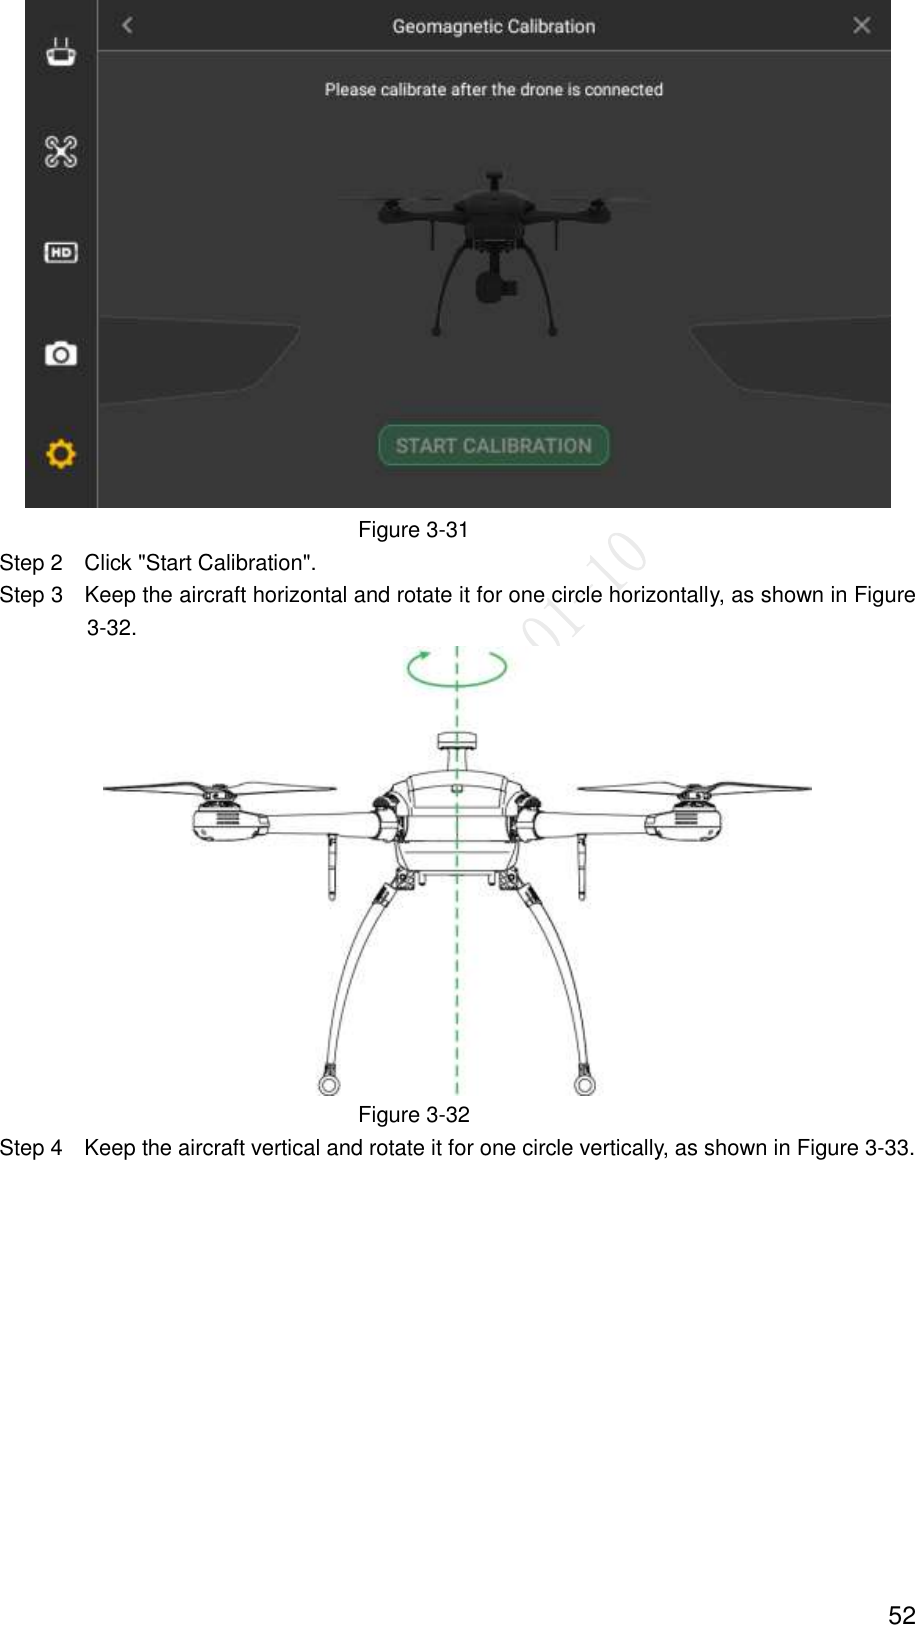  52  Figure 3-31                 Step 2    Click &quot;Start Calibration&quot;.                 Step 3    Keep the aircraft horizontal and rotate it for one circle horizontally, as shown in Figure 3-32.  Figure 3-32                 Step 4    Keep the aircraft vertical and rotate it for one circle vertically, as shown in Figure 3-33. 